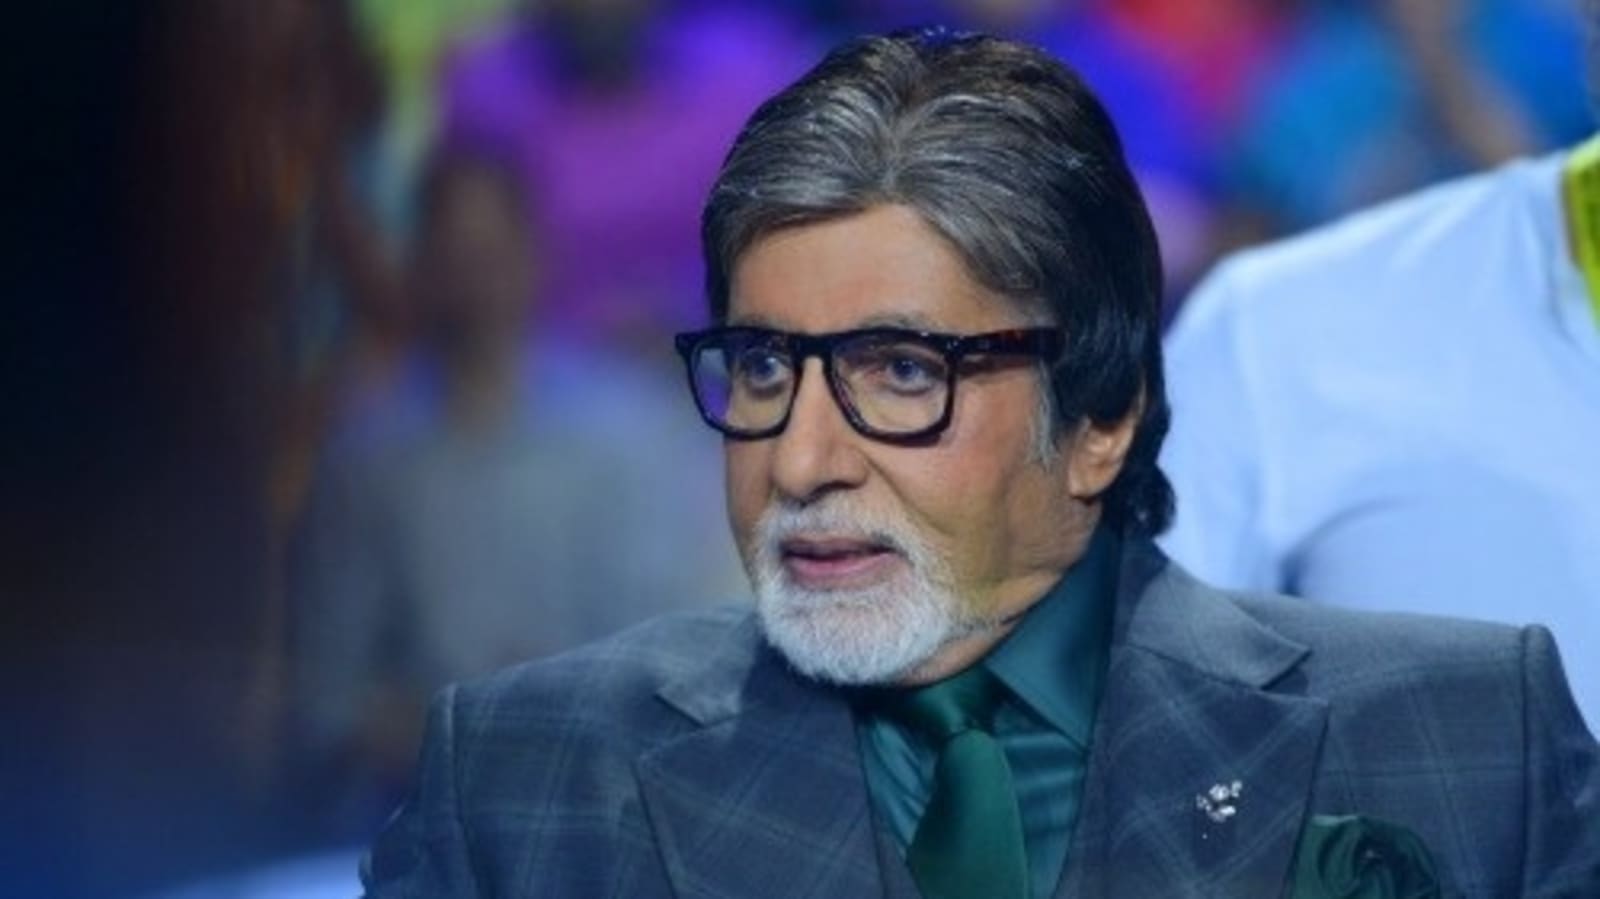 Amitabh Bachchan jokes ‘I wash my own clothes, iron them myself’ after KBC contestant wonders why he never repeats dress